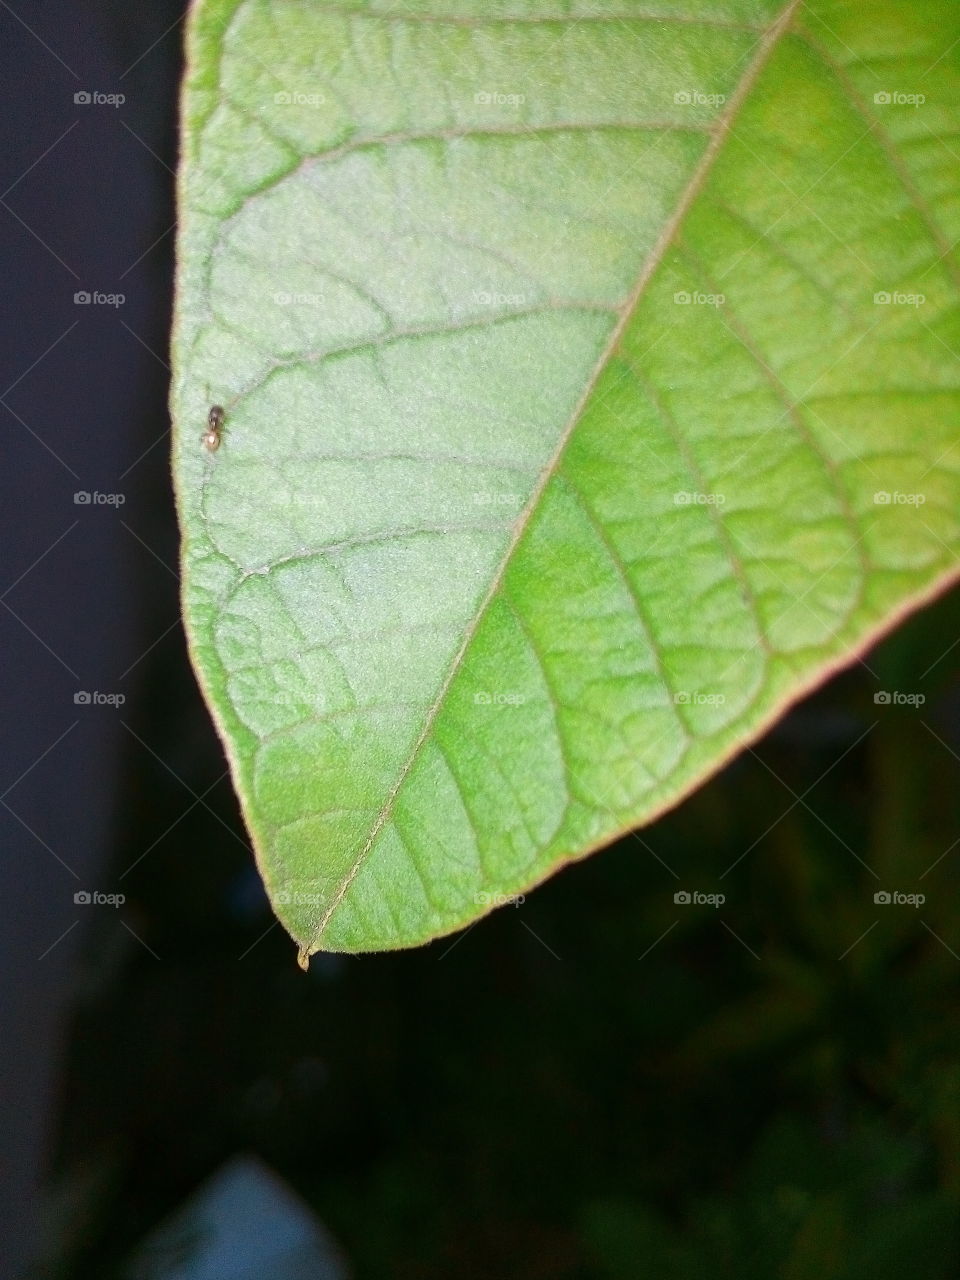 Insect on leaf